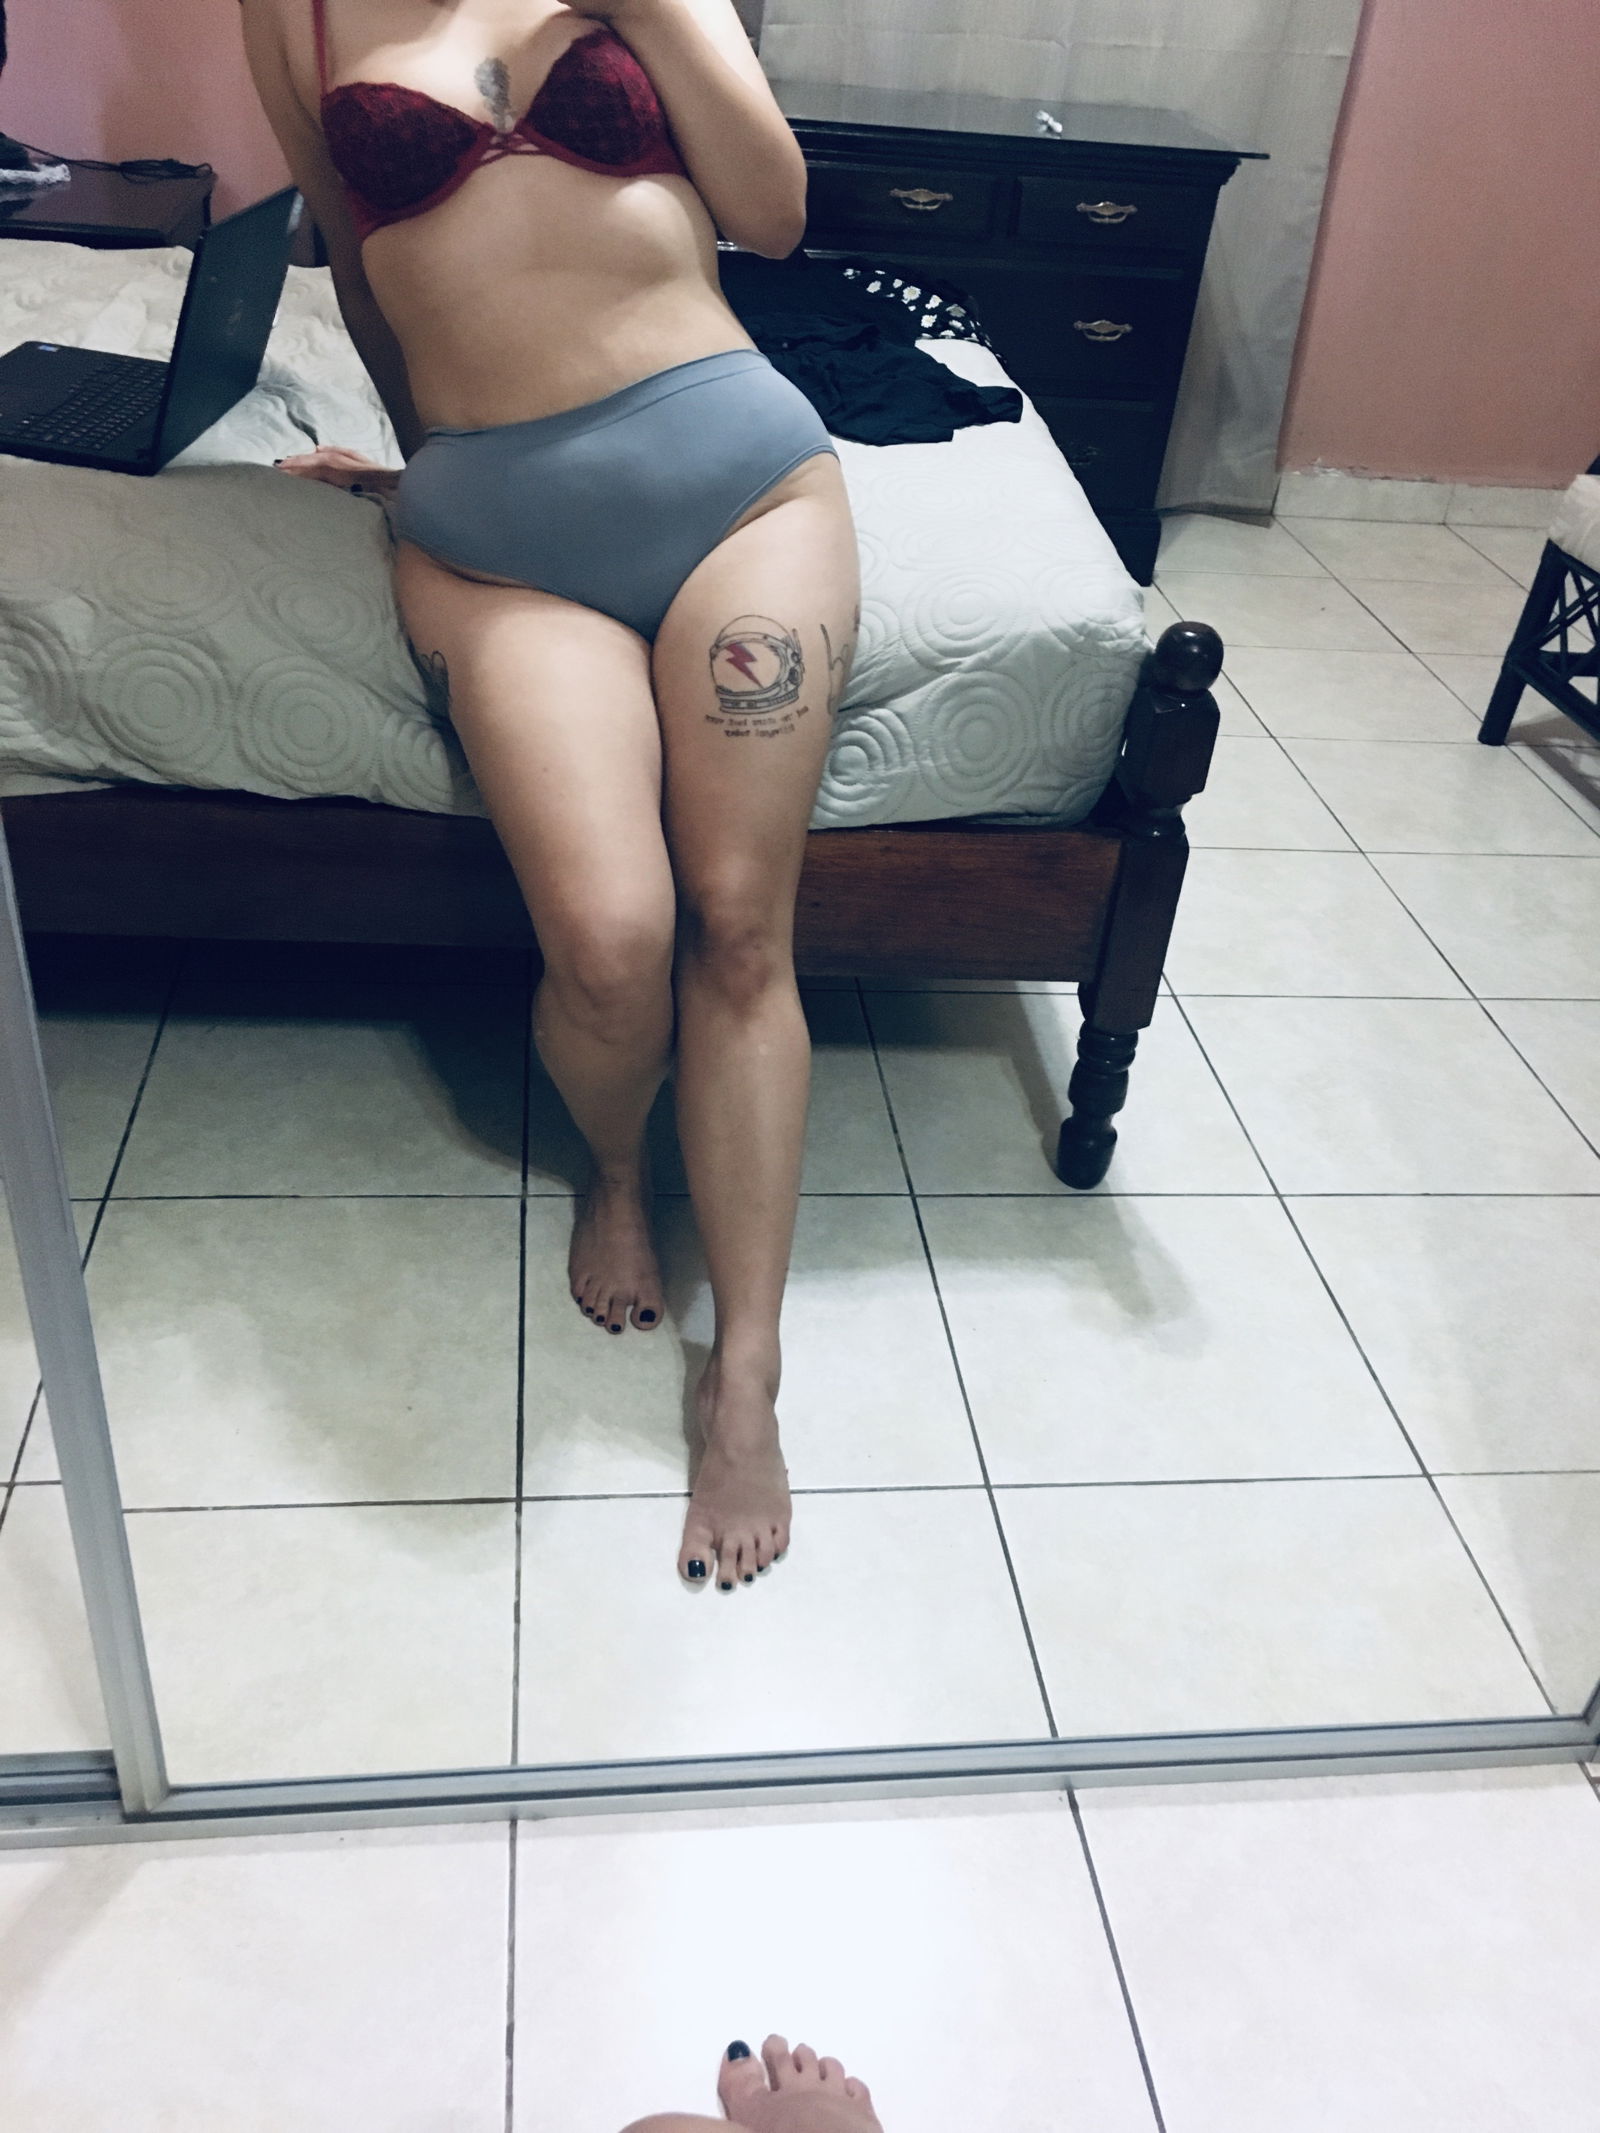 Photo by lucylish with the username @lucylish,  September 7, 2020 at 5:54 PM. The post is about the topic thighs and the text says 'anyone else loves thighs tattoos? seller here 😏🍑'